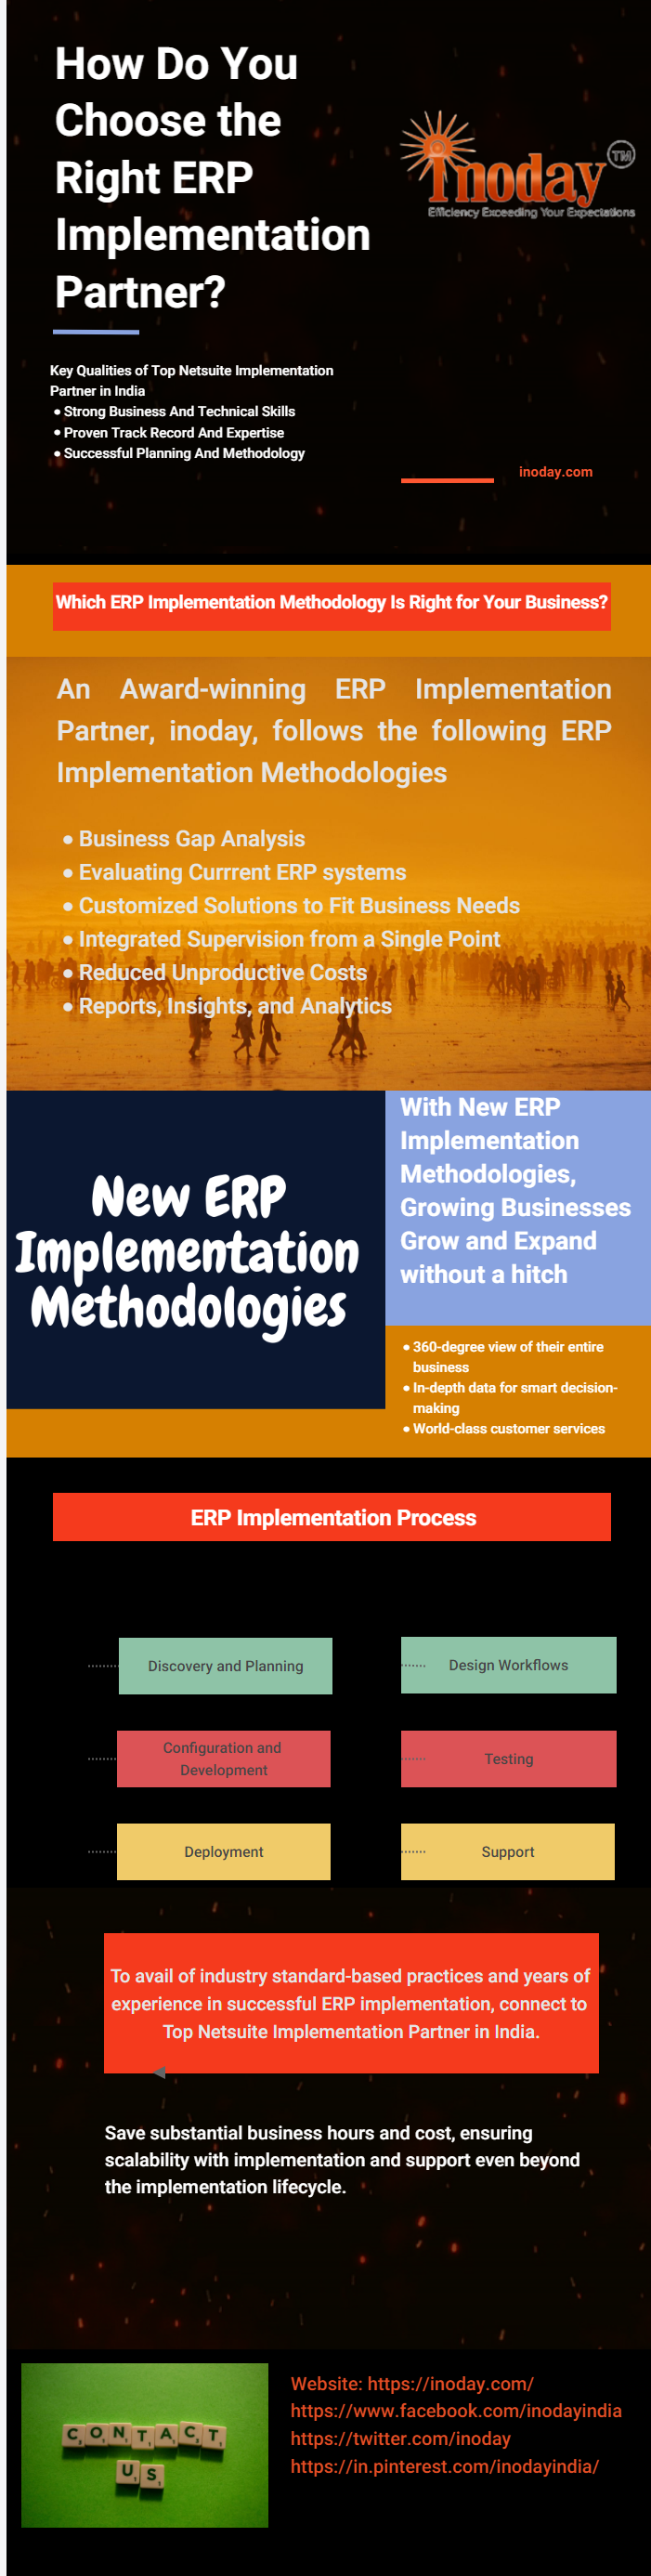 How Do You Choose the Right ERP Implementation Partner?